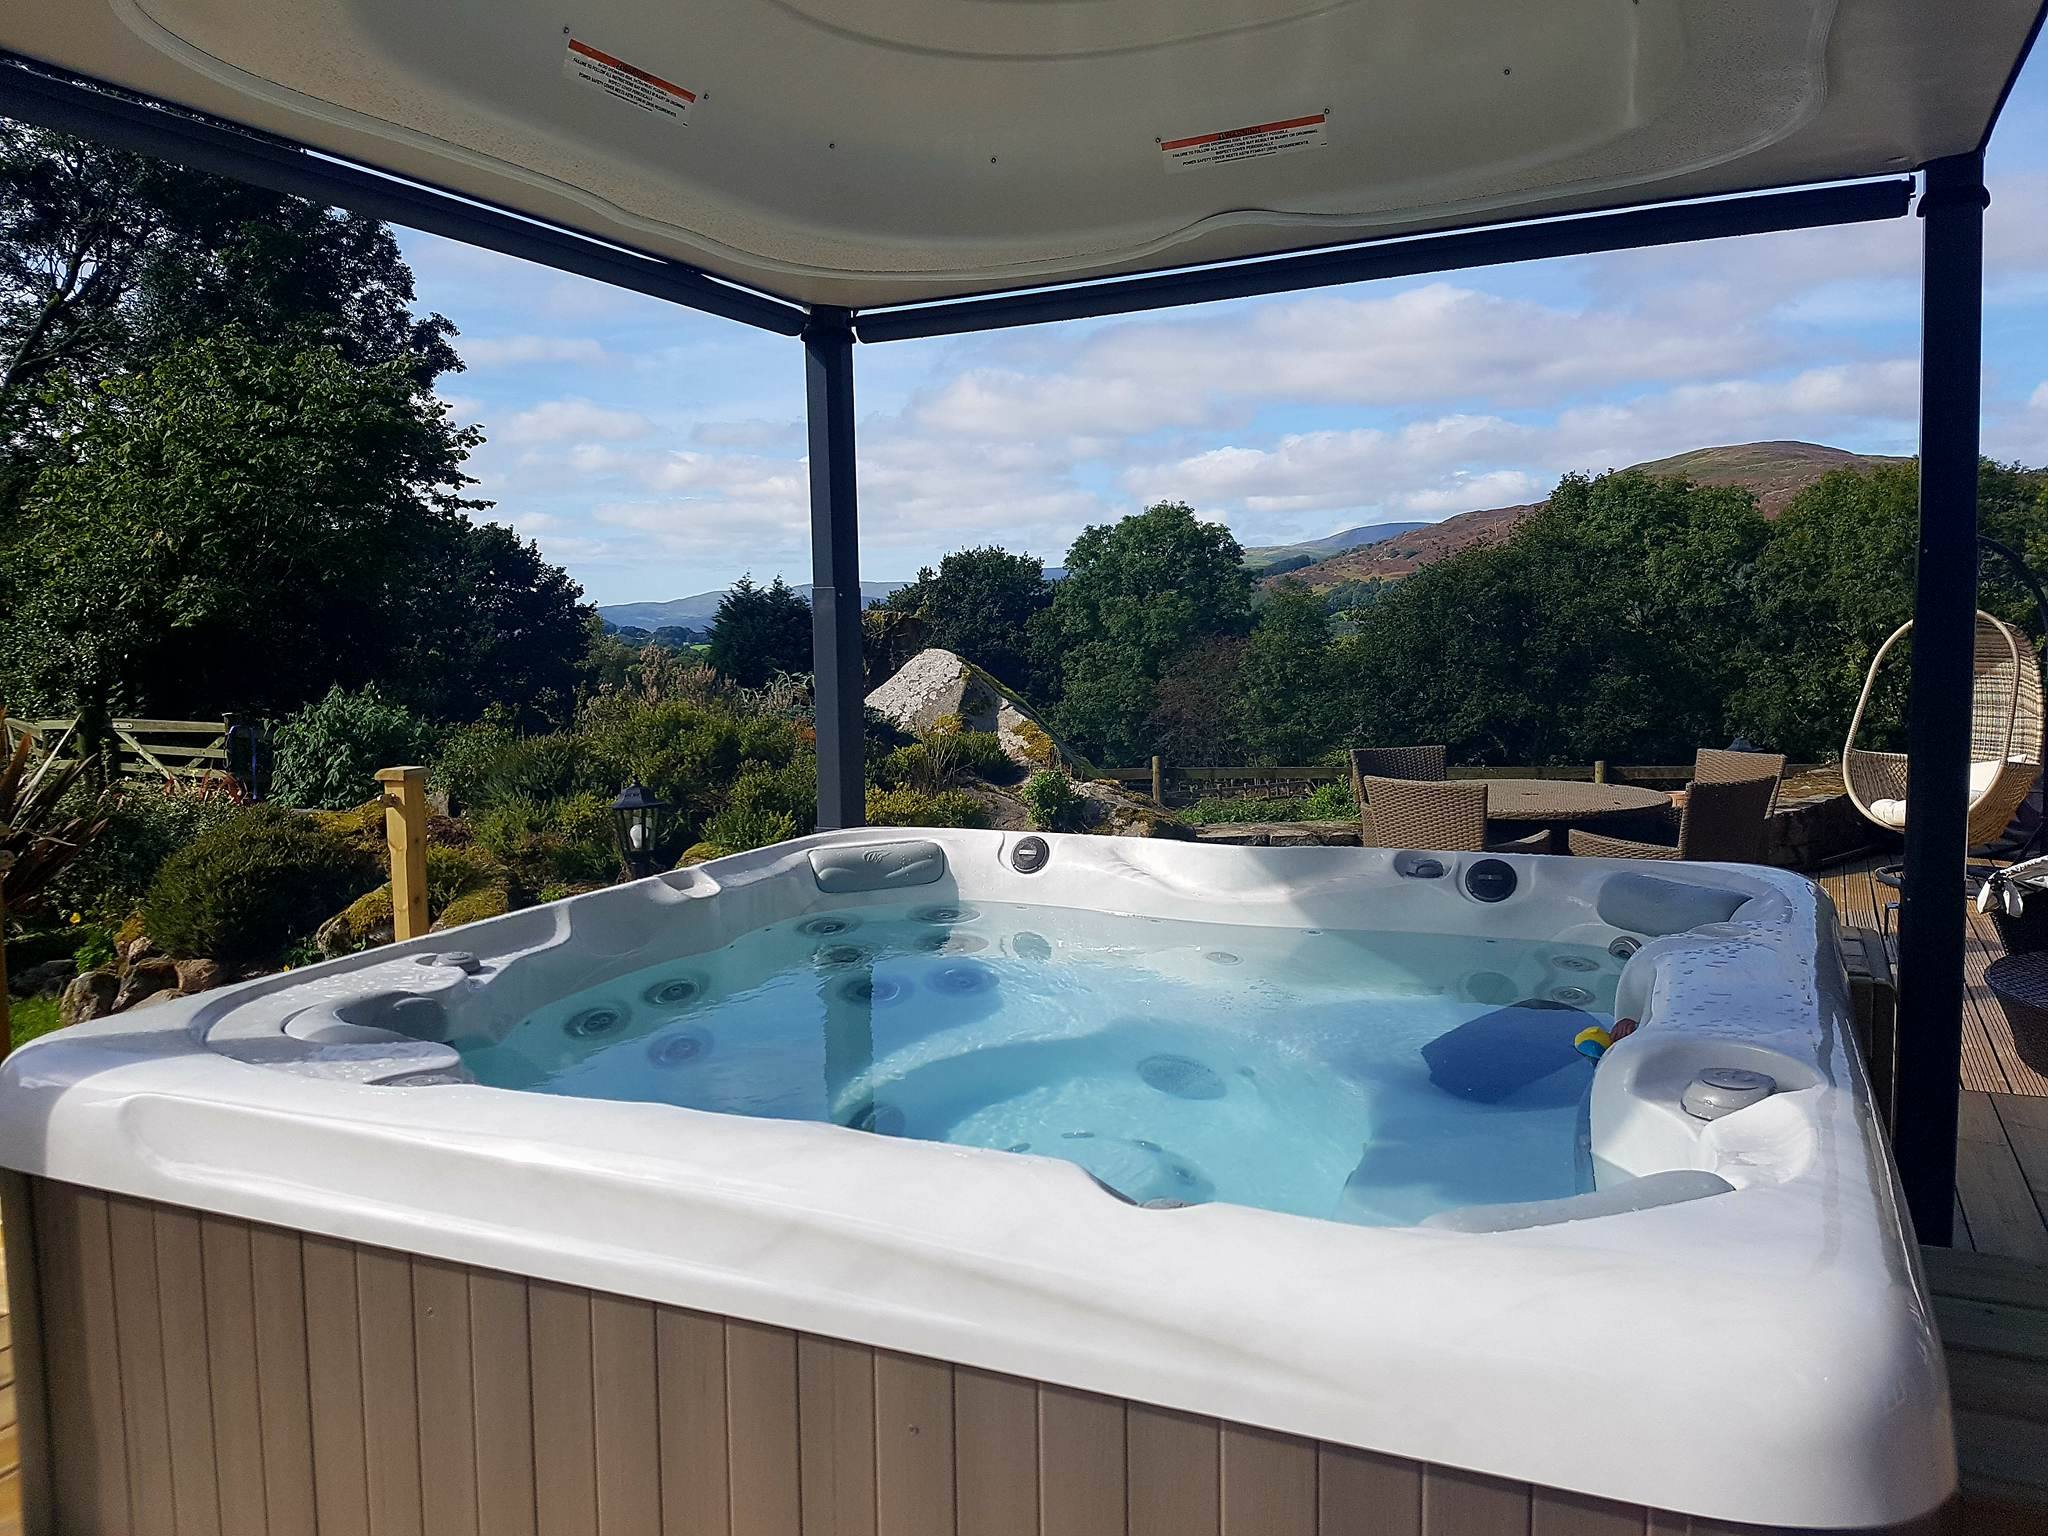 An image of an outdor hot tub